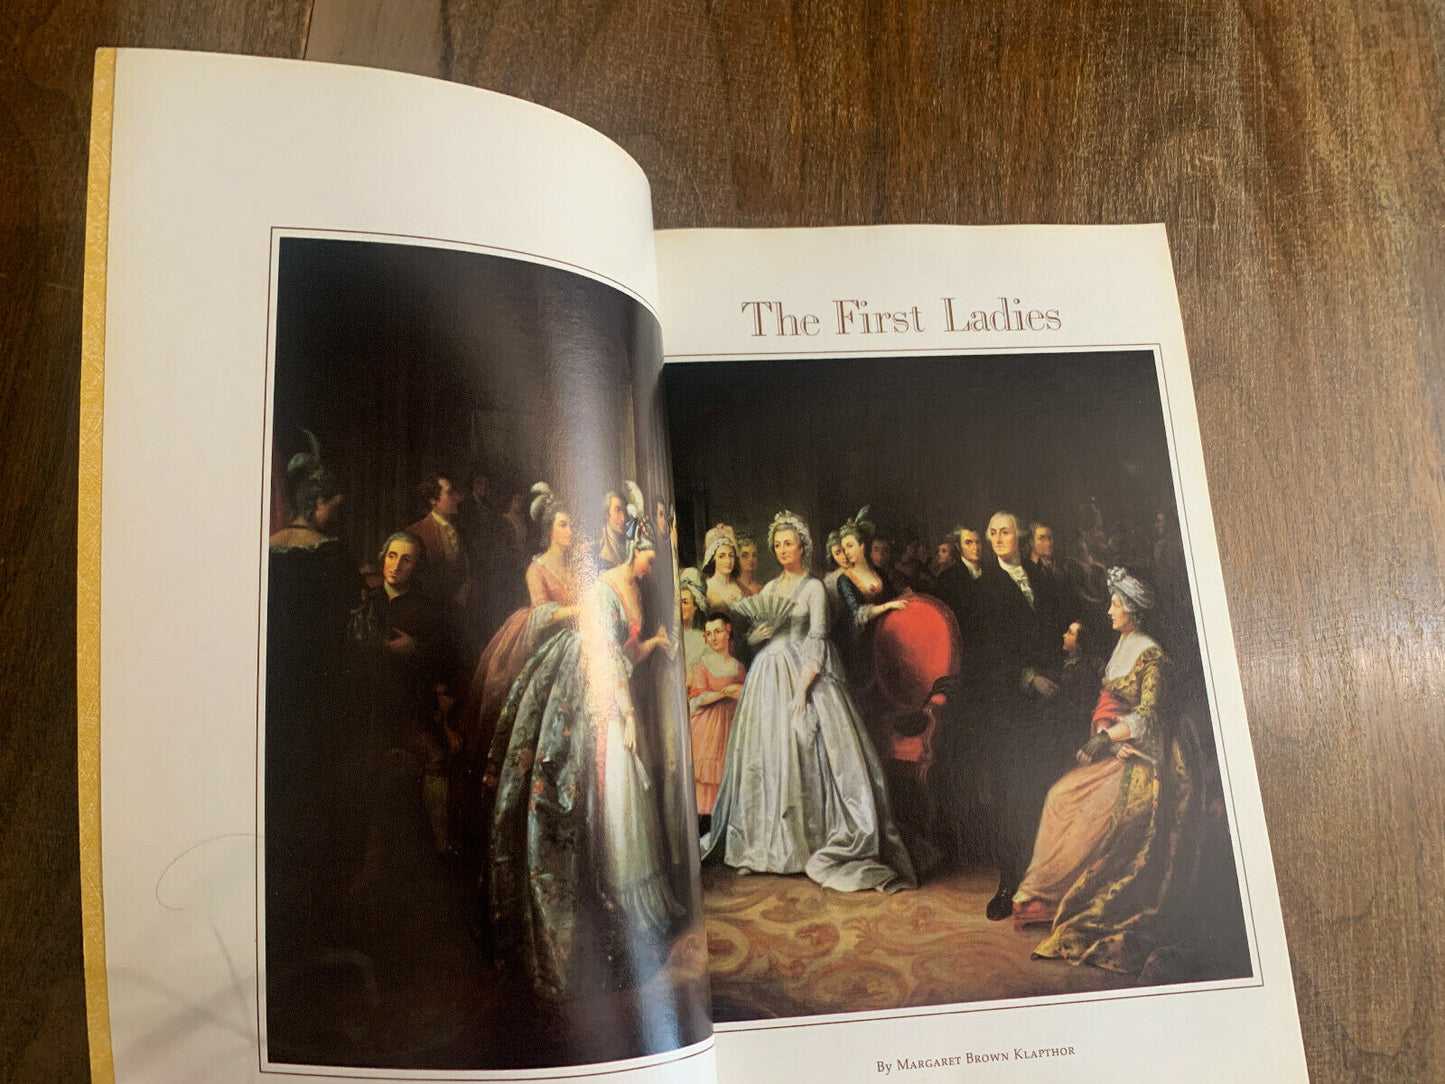 The First Ladies by Margaret Brown Klapthor 1985 (Q6)